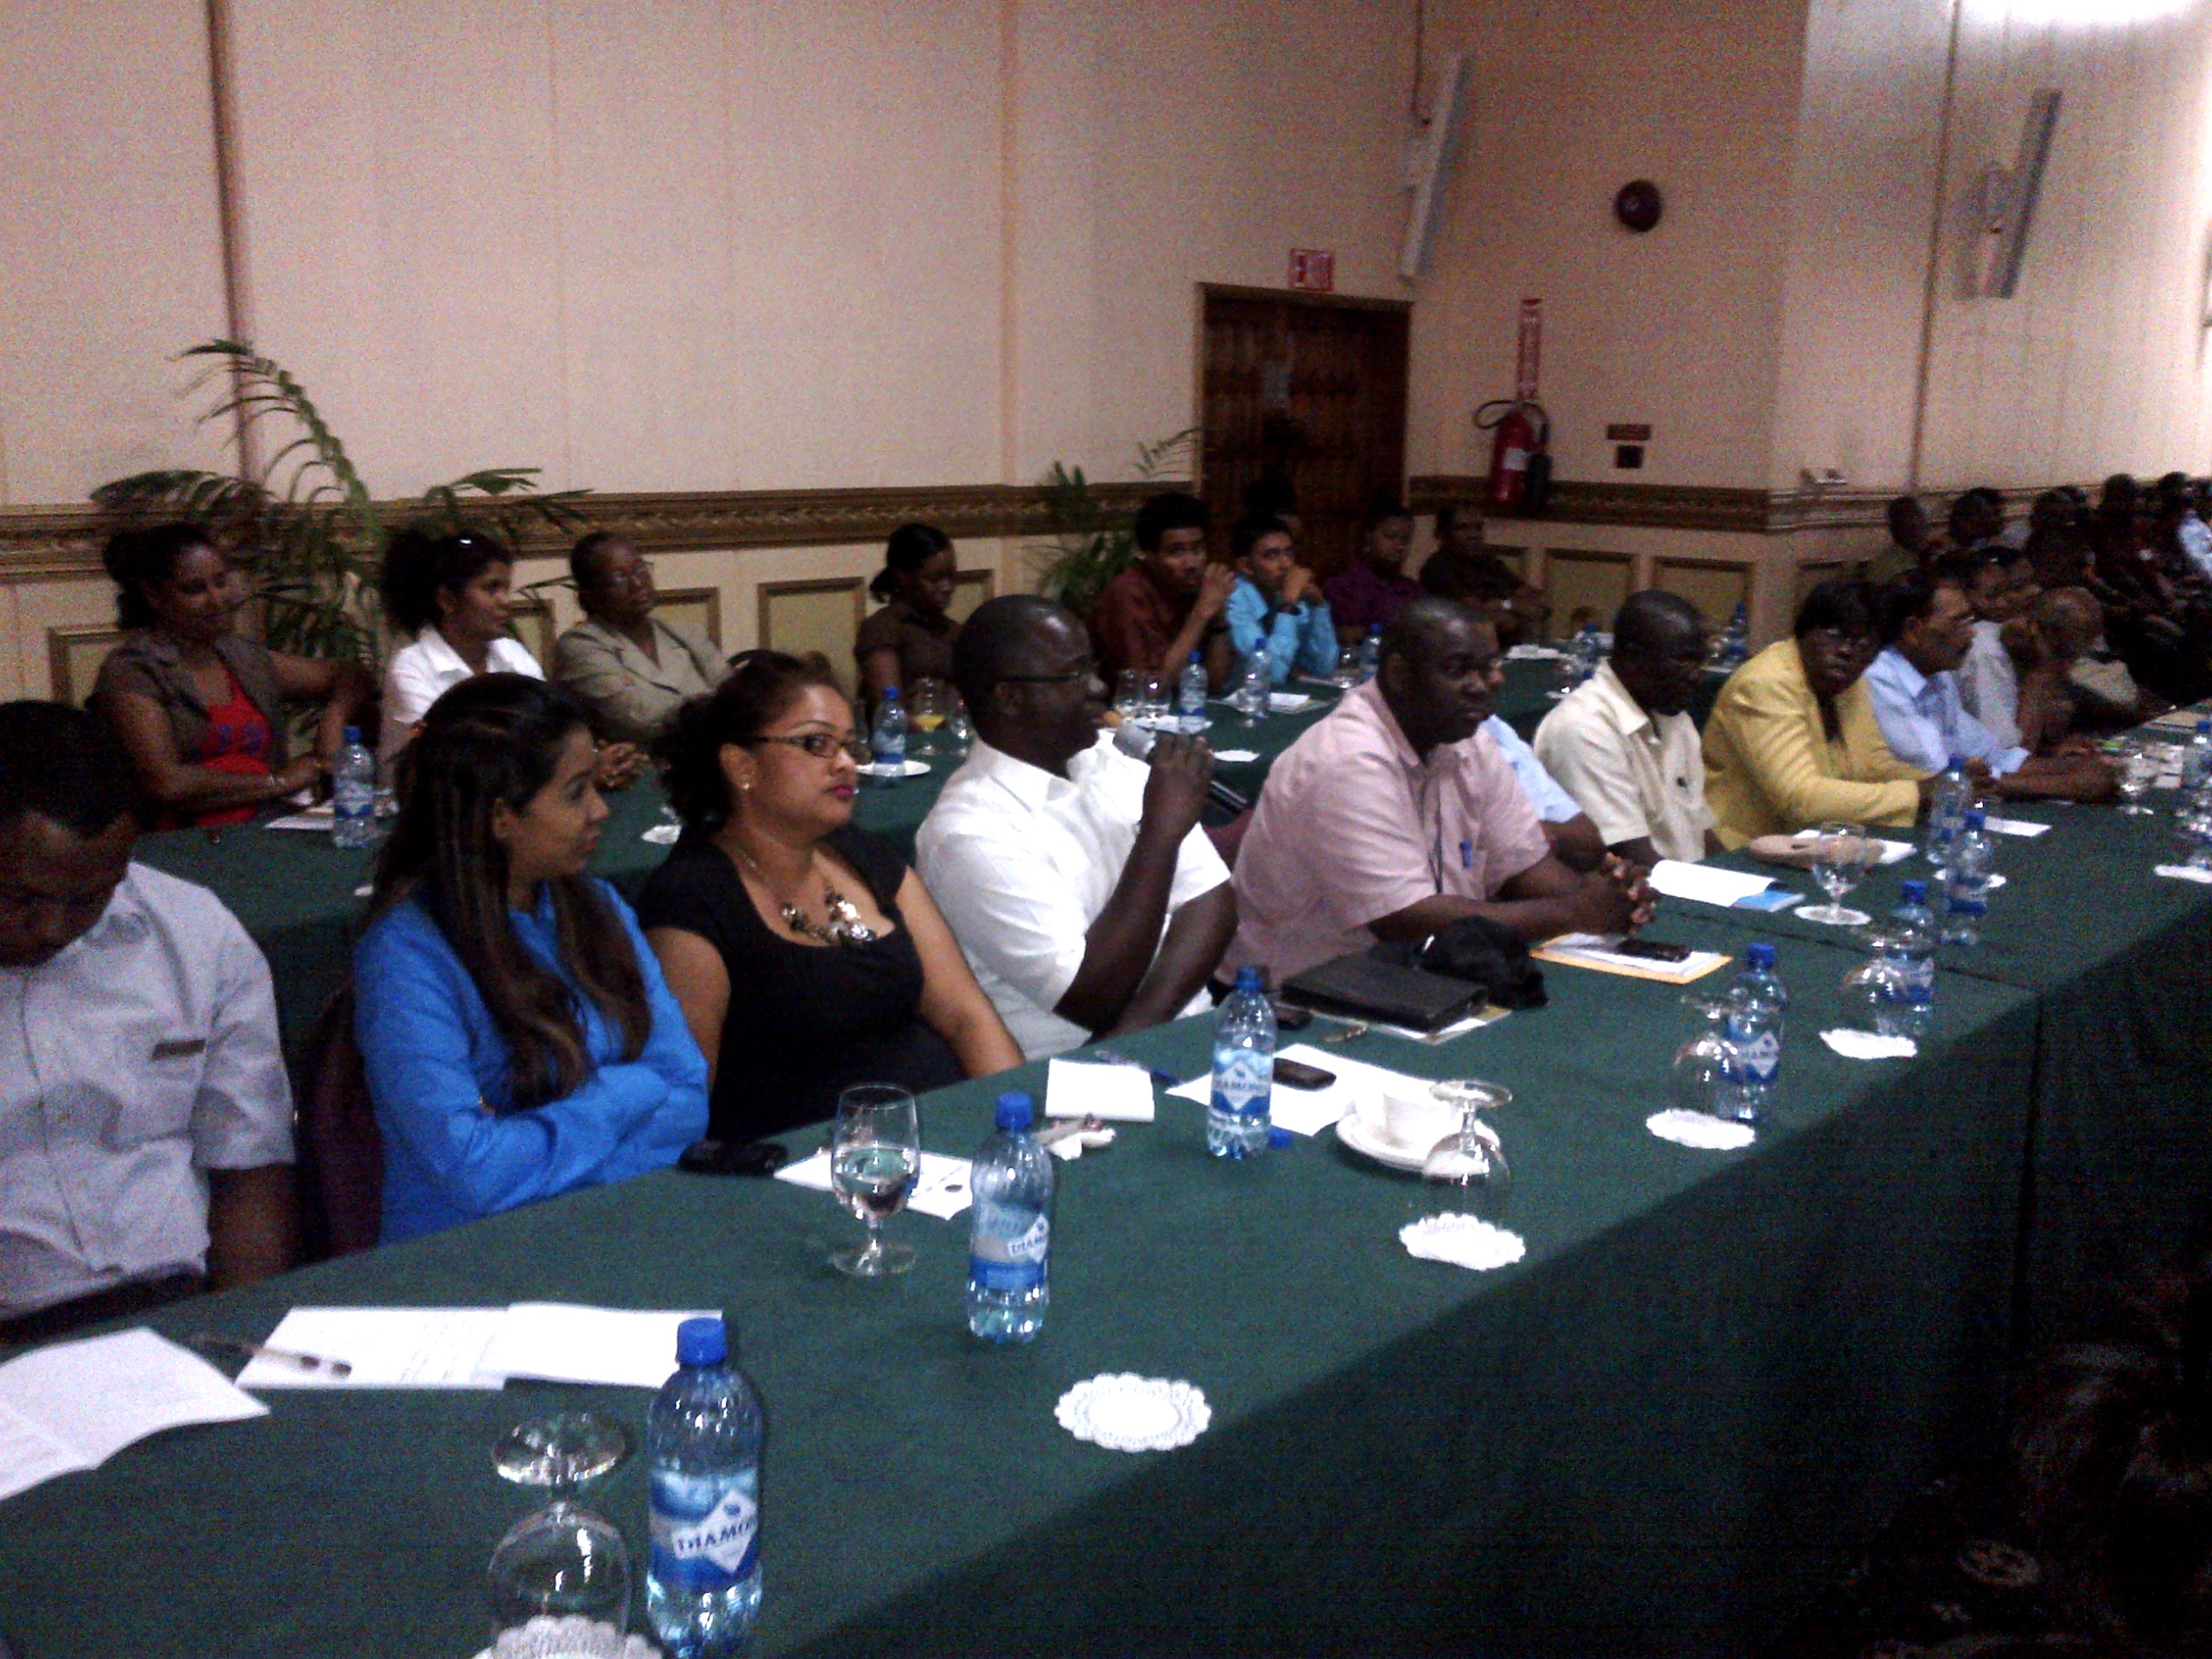 Scenes from our Customer Service Seminar held on October 15, 2013